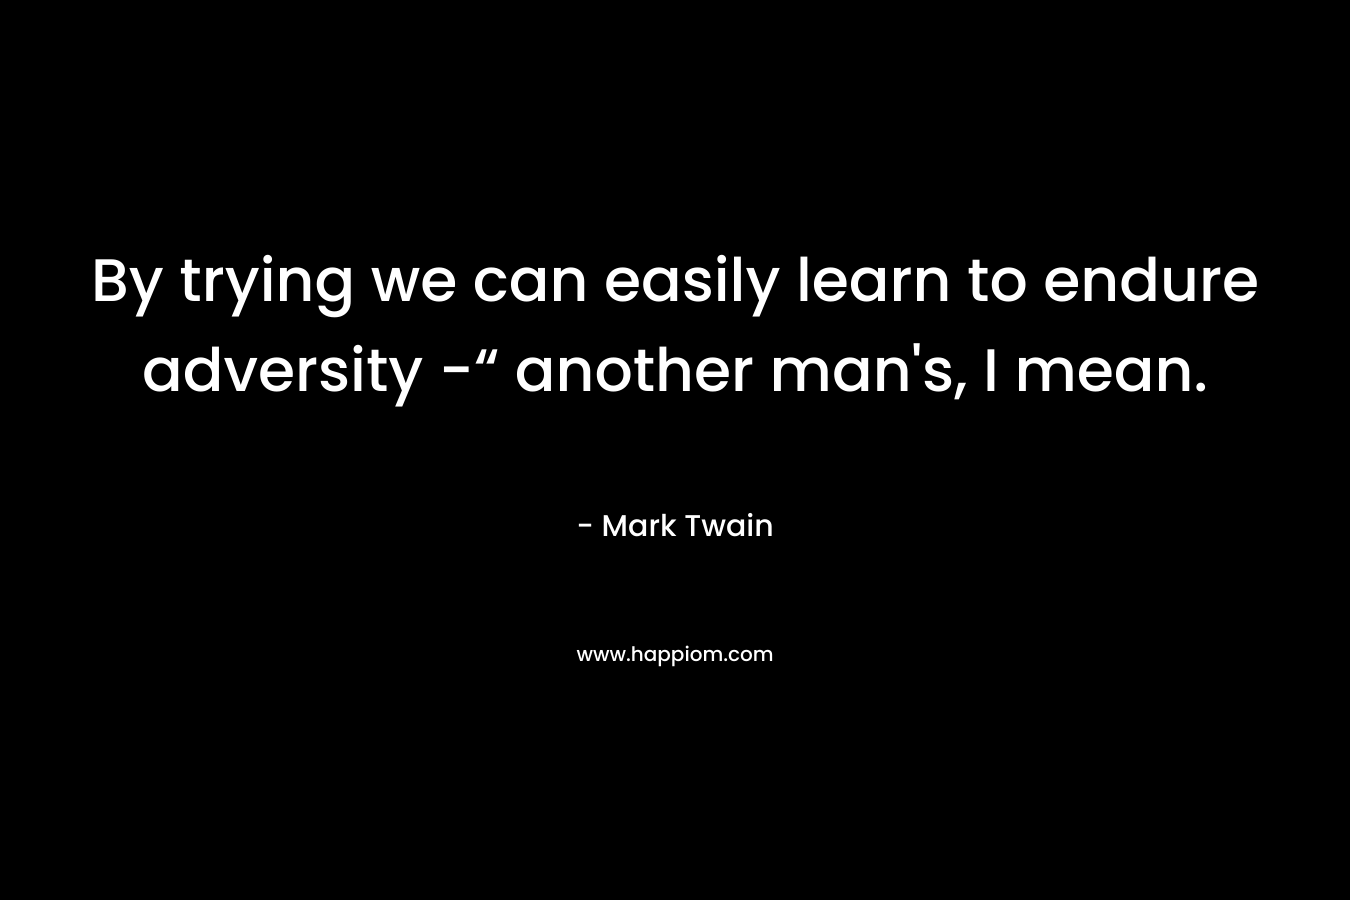 By trying we can easily learn to endure adversity -“ another man's, I mean.